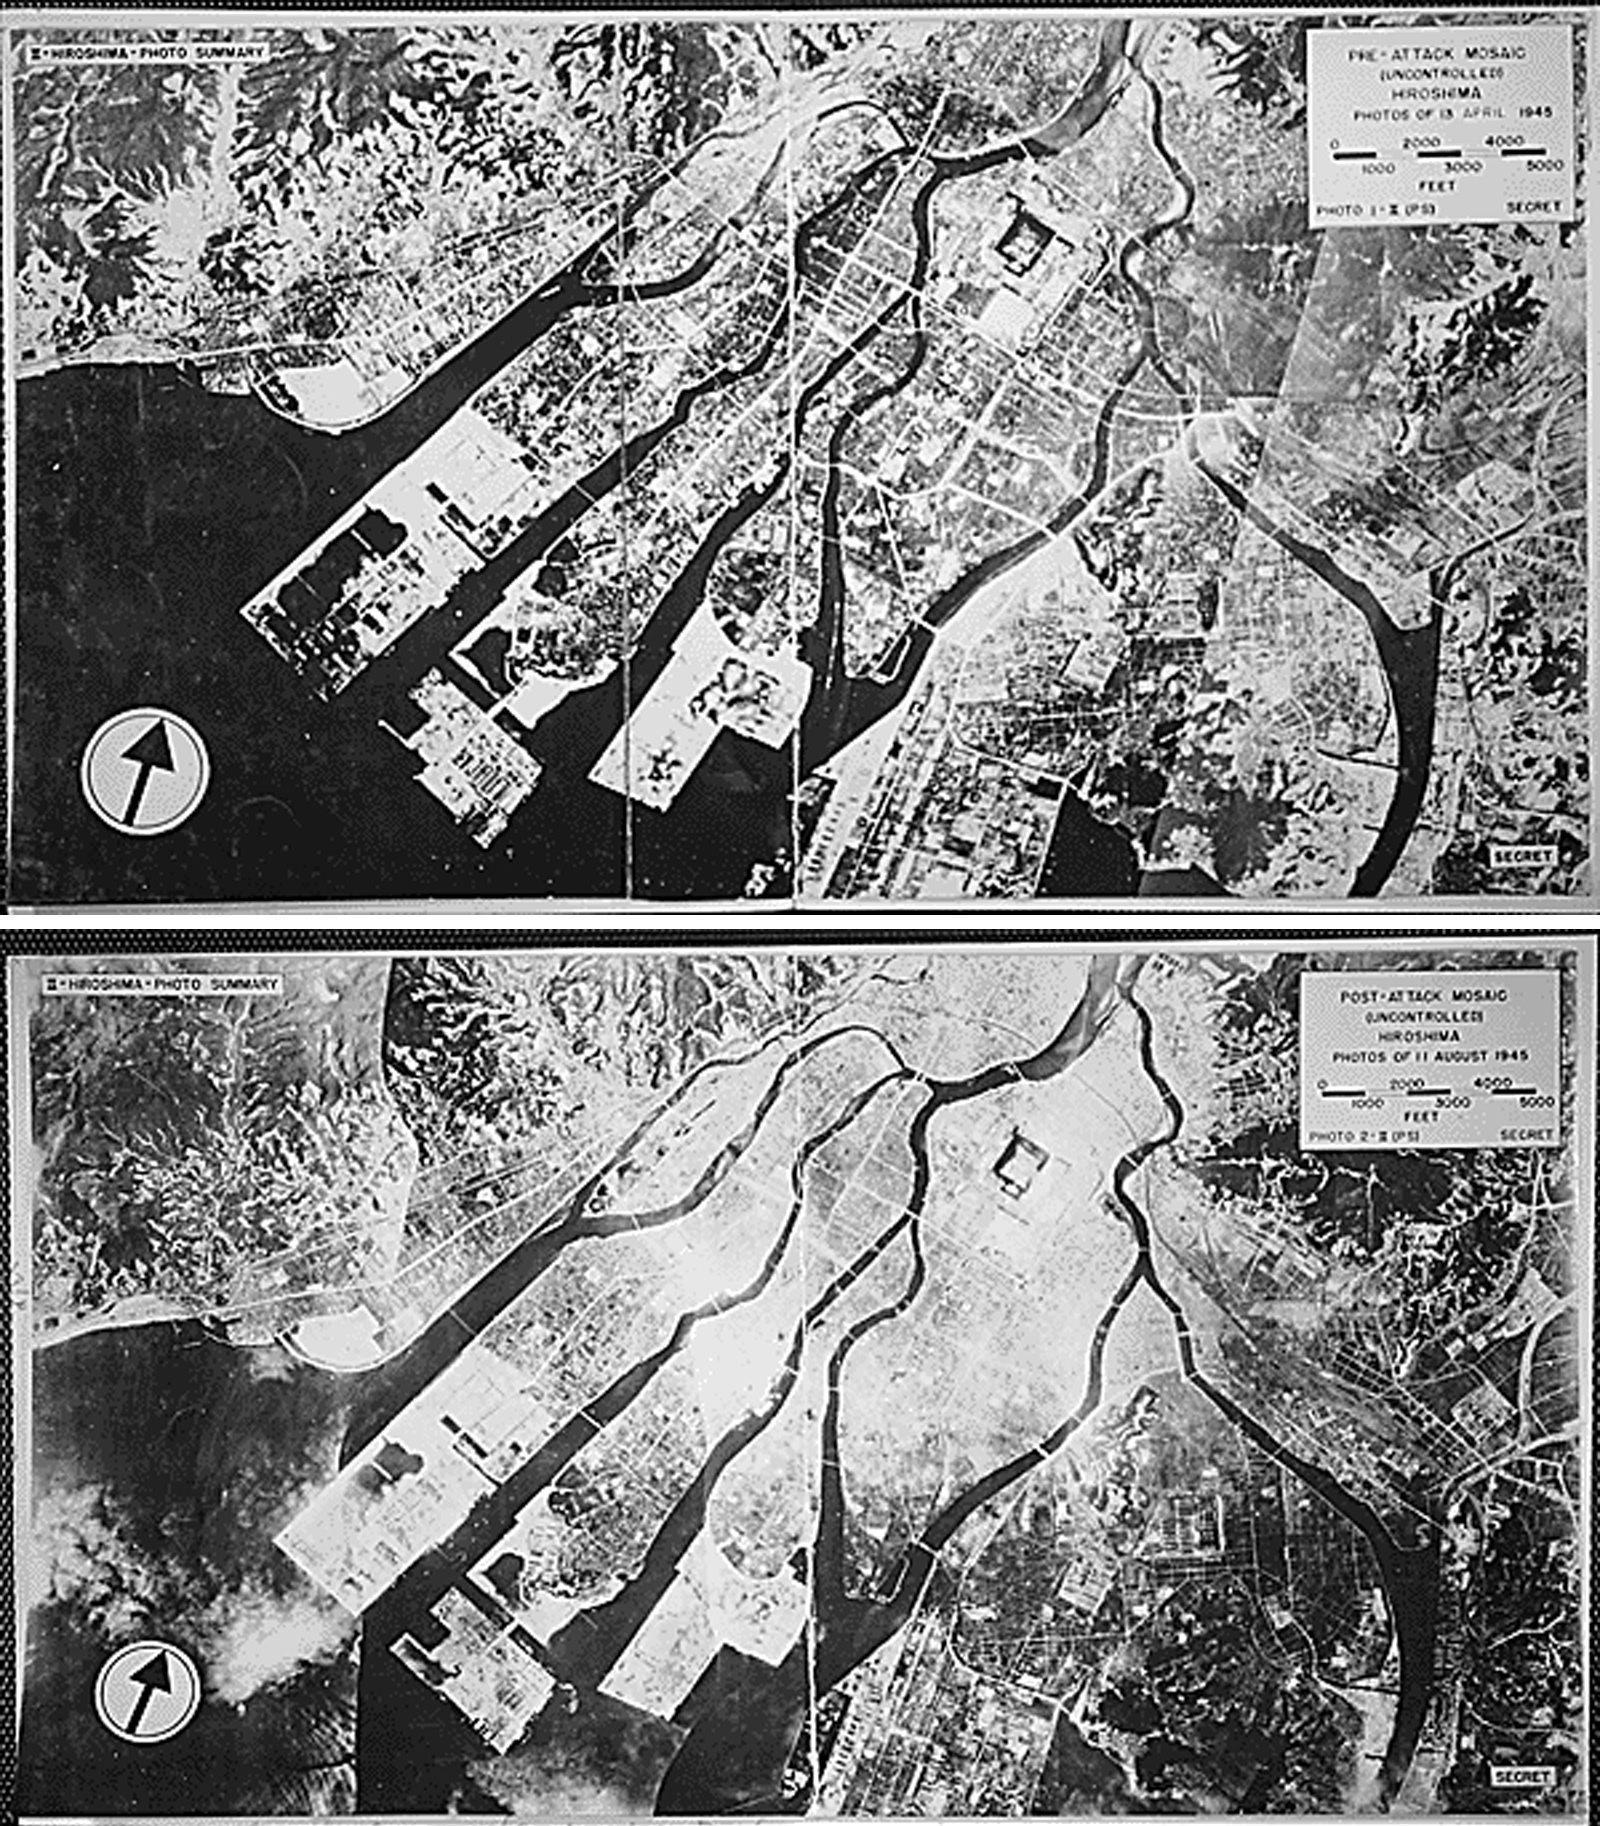 epa04867703 A combined picture of handout images made available by the US National Archives of mosaic views of Hiroshima, Japan on 13 April 1945 before (top) and on 11 August 1945 after (bottom) the atomic bomb was dropped on 06 August 1945. 06 August 2015 marks the 70th anniversary of the atomic bombing on Hiroshima. The US B-29 Superfortress bomber Enola Gay dropped an atomic bomb codenamed 'Little Boy' on Hiroshima on 06 August 1945, killing tens of thousands of people in seconds. By the end of the year, 140,000 people had died from the effects of the bomb. On 09 August 1945 a second atomic bomb was exploded over Nagasaki, killing more than 73,000 people. The 'Little Boy' was the first ever nuclear bomb dropped on a city and a crucial turn that led to Japan's surrender in WWII.  EPA/US NATIONAL ARCHIVES / HANDOUT   EDITORIAL USE ONLY